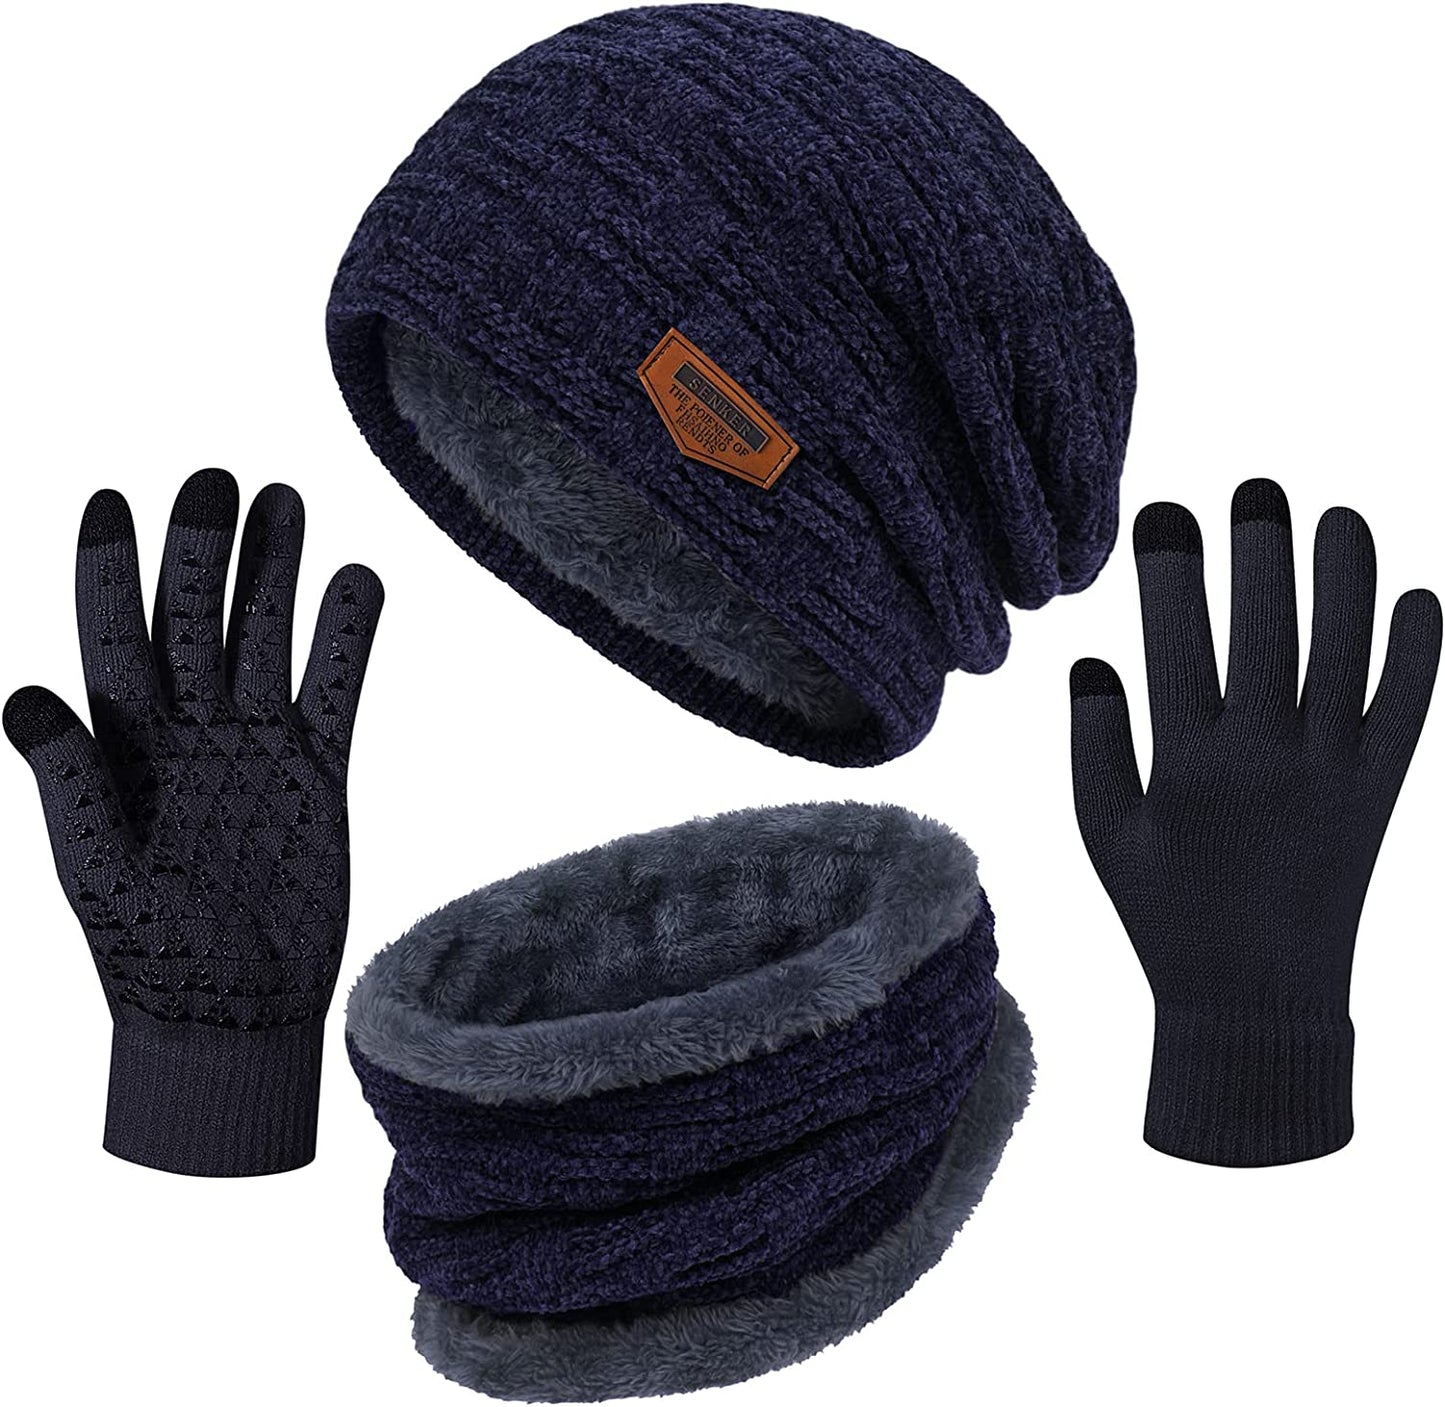 3 Pieces Winter Beanie Hat, Scarf and Touchscreen Gloves Set for Men and Women Slouchy Warm Fleece Lined Caps Neck Warmer